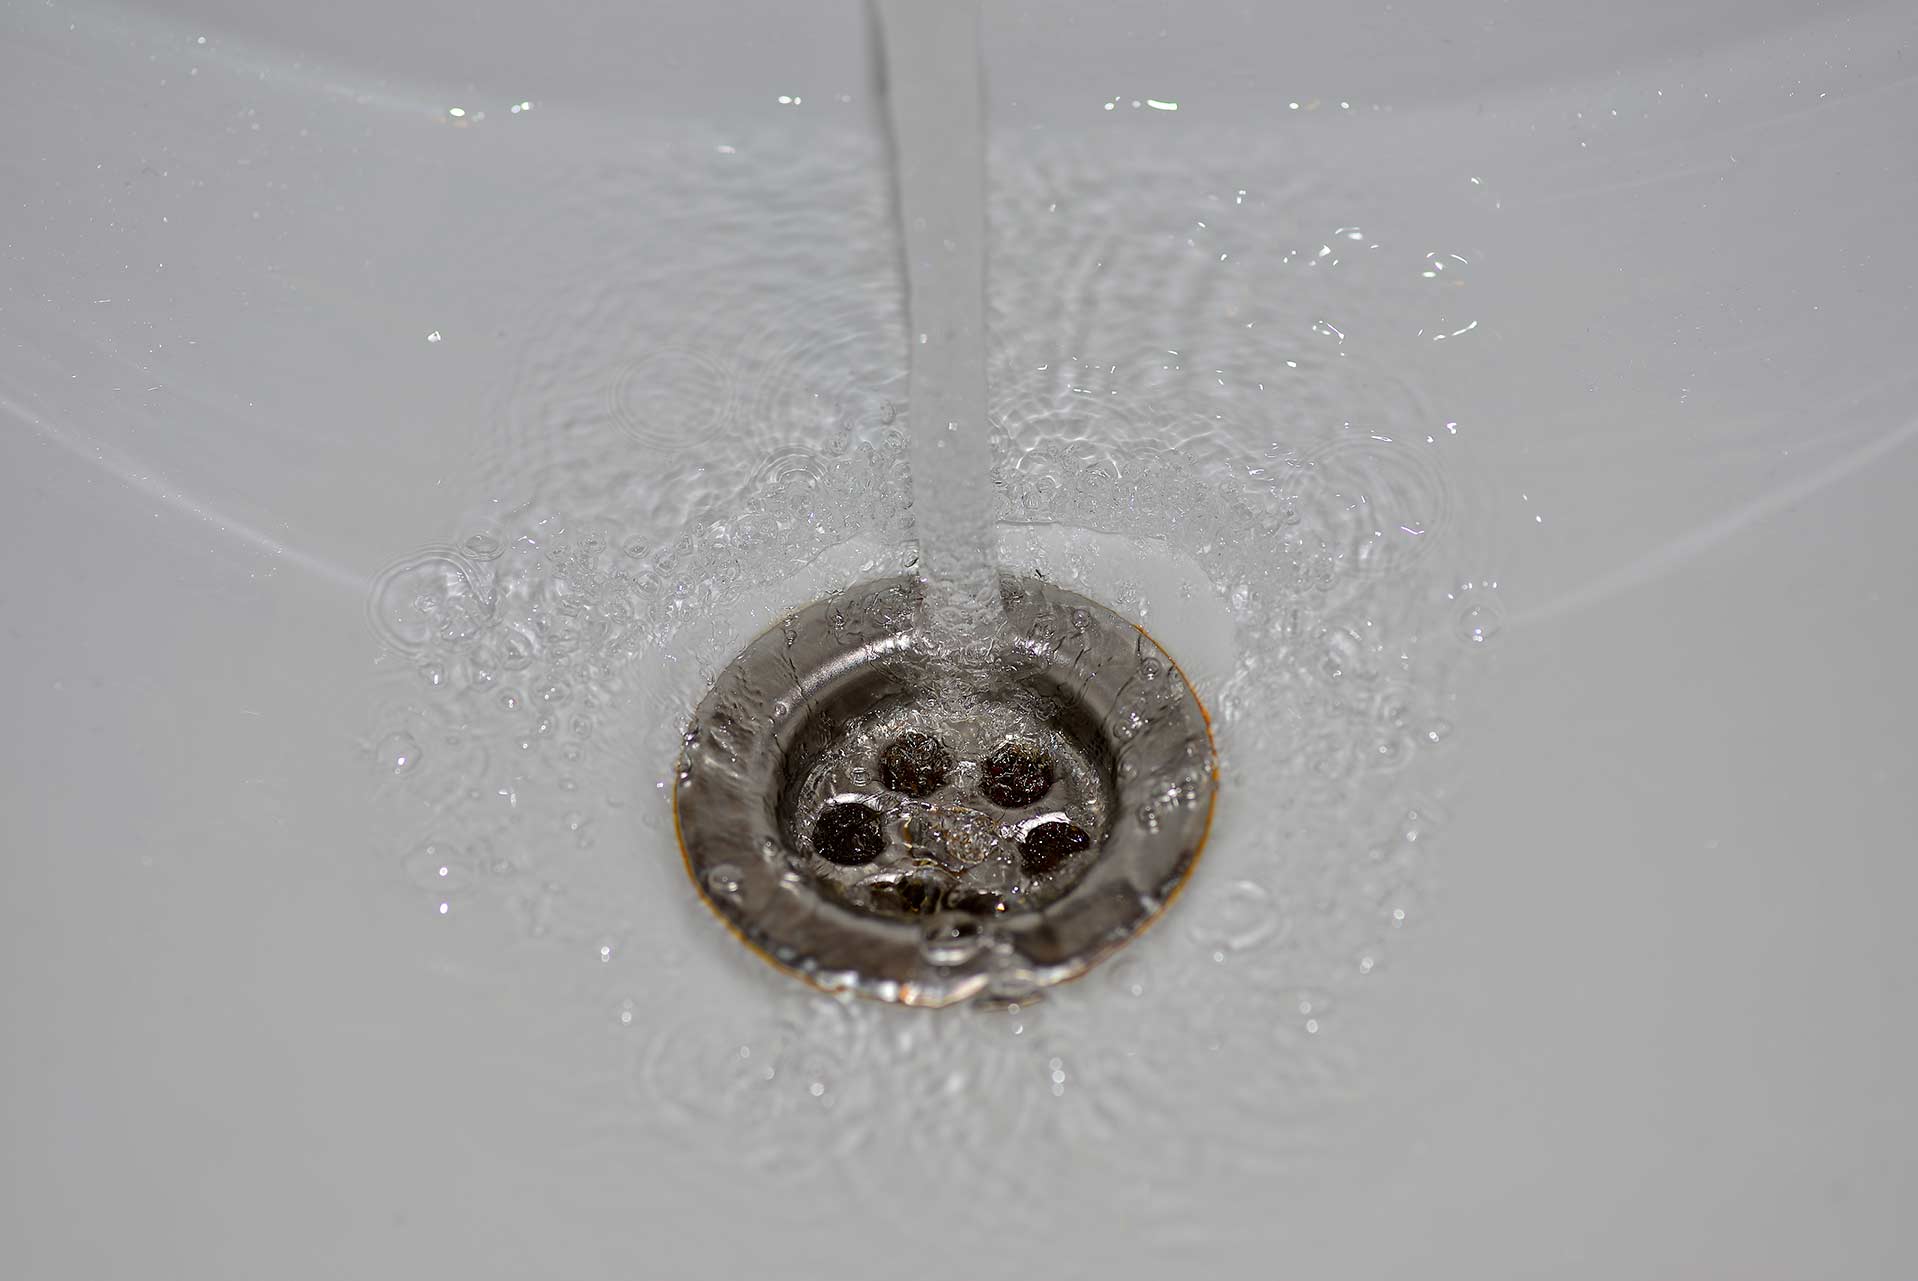 A2B Drains provides services to unblock blocked sinks and drains for properties in Loughton.